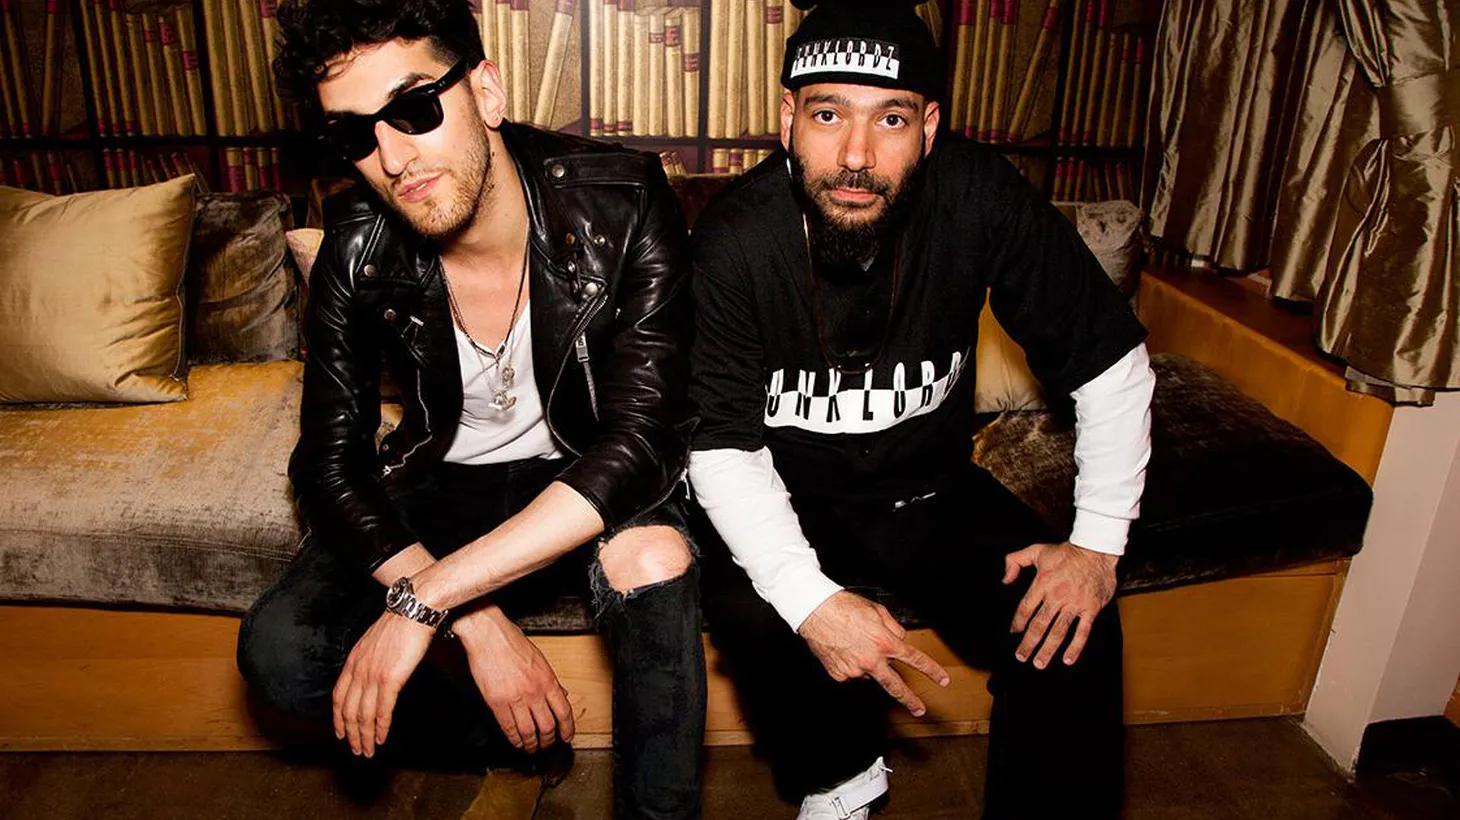 Chromeo's been playing its brand of 80's influenced electro-funk for the past decade. The duo's recent performance at KCRW's Apogee Sessions showcased its party-starting talents.